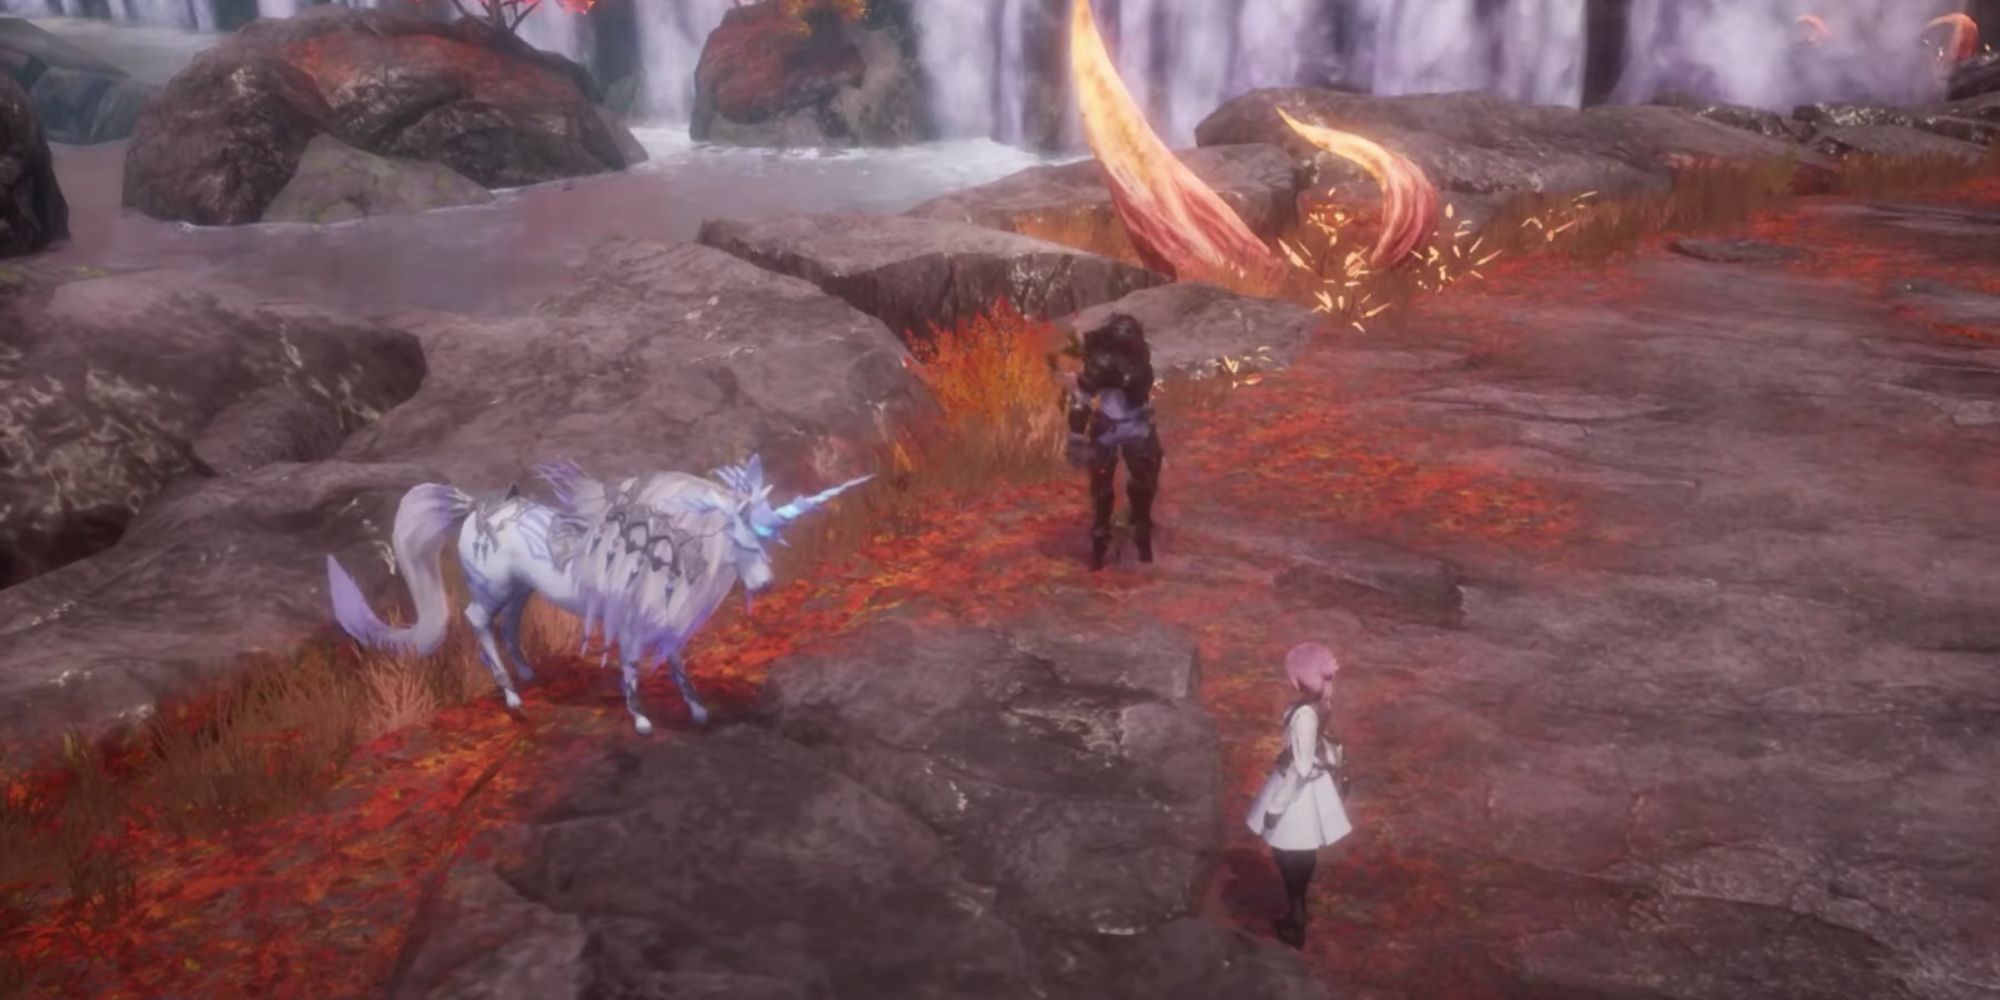 Unicorn and main character first encounter scene